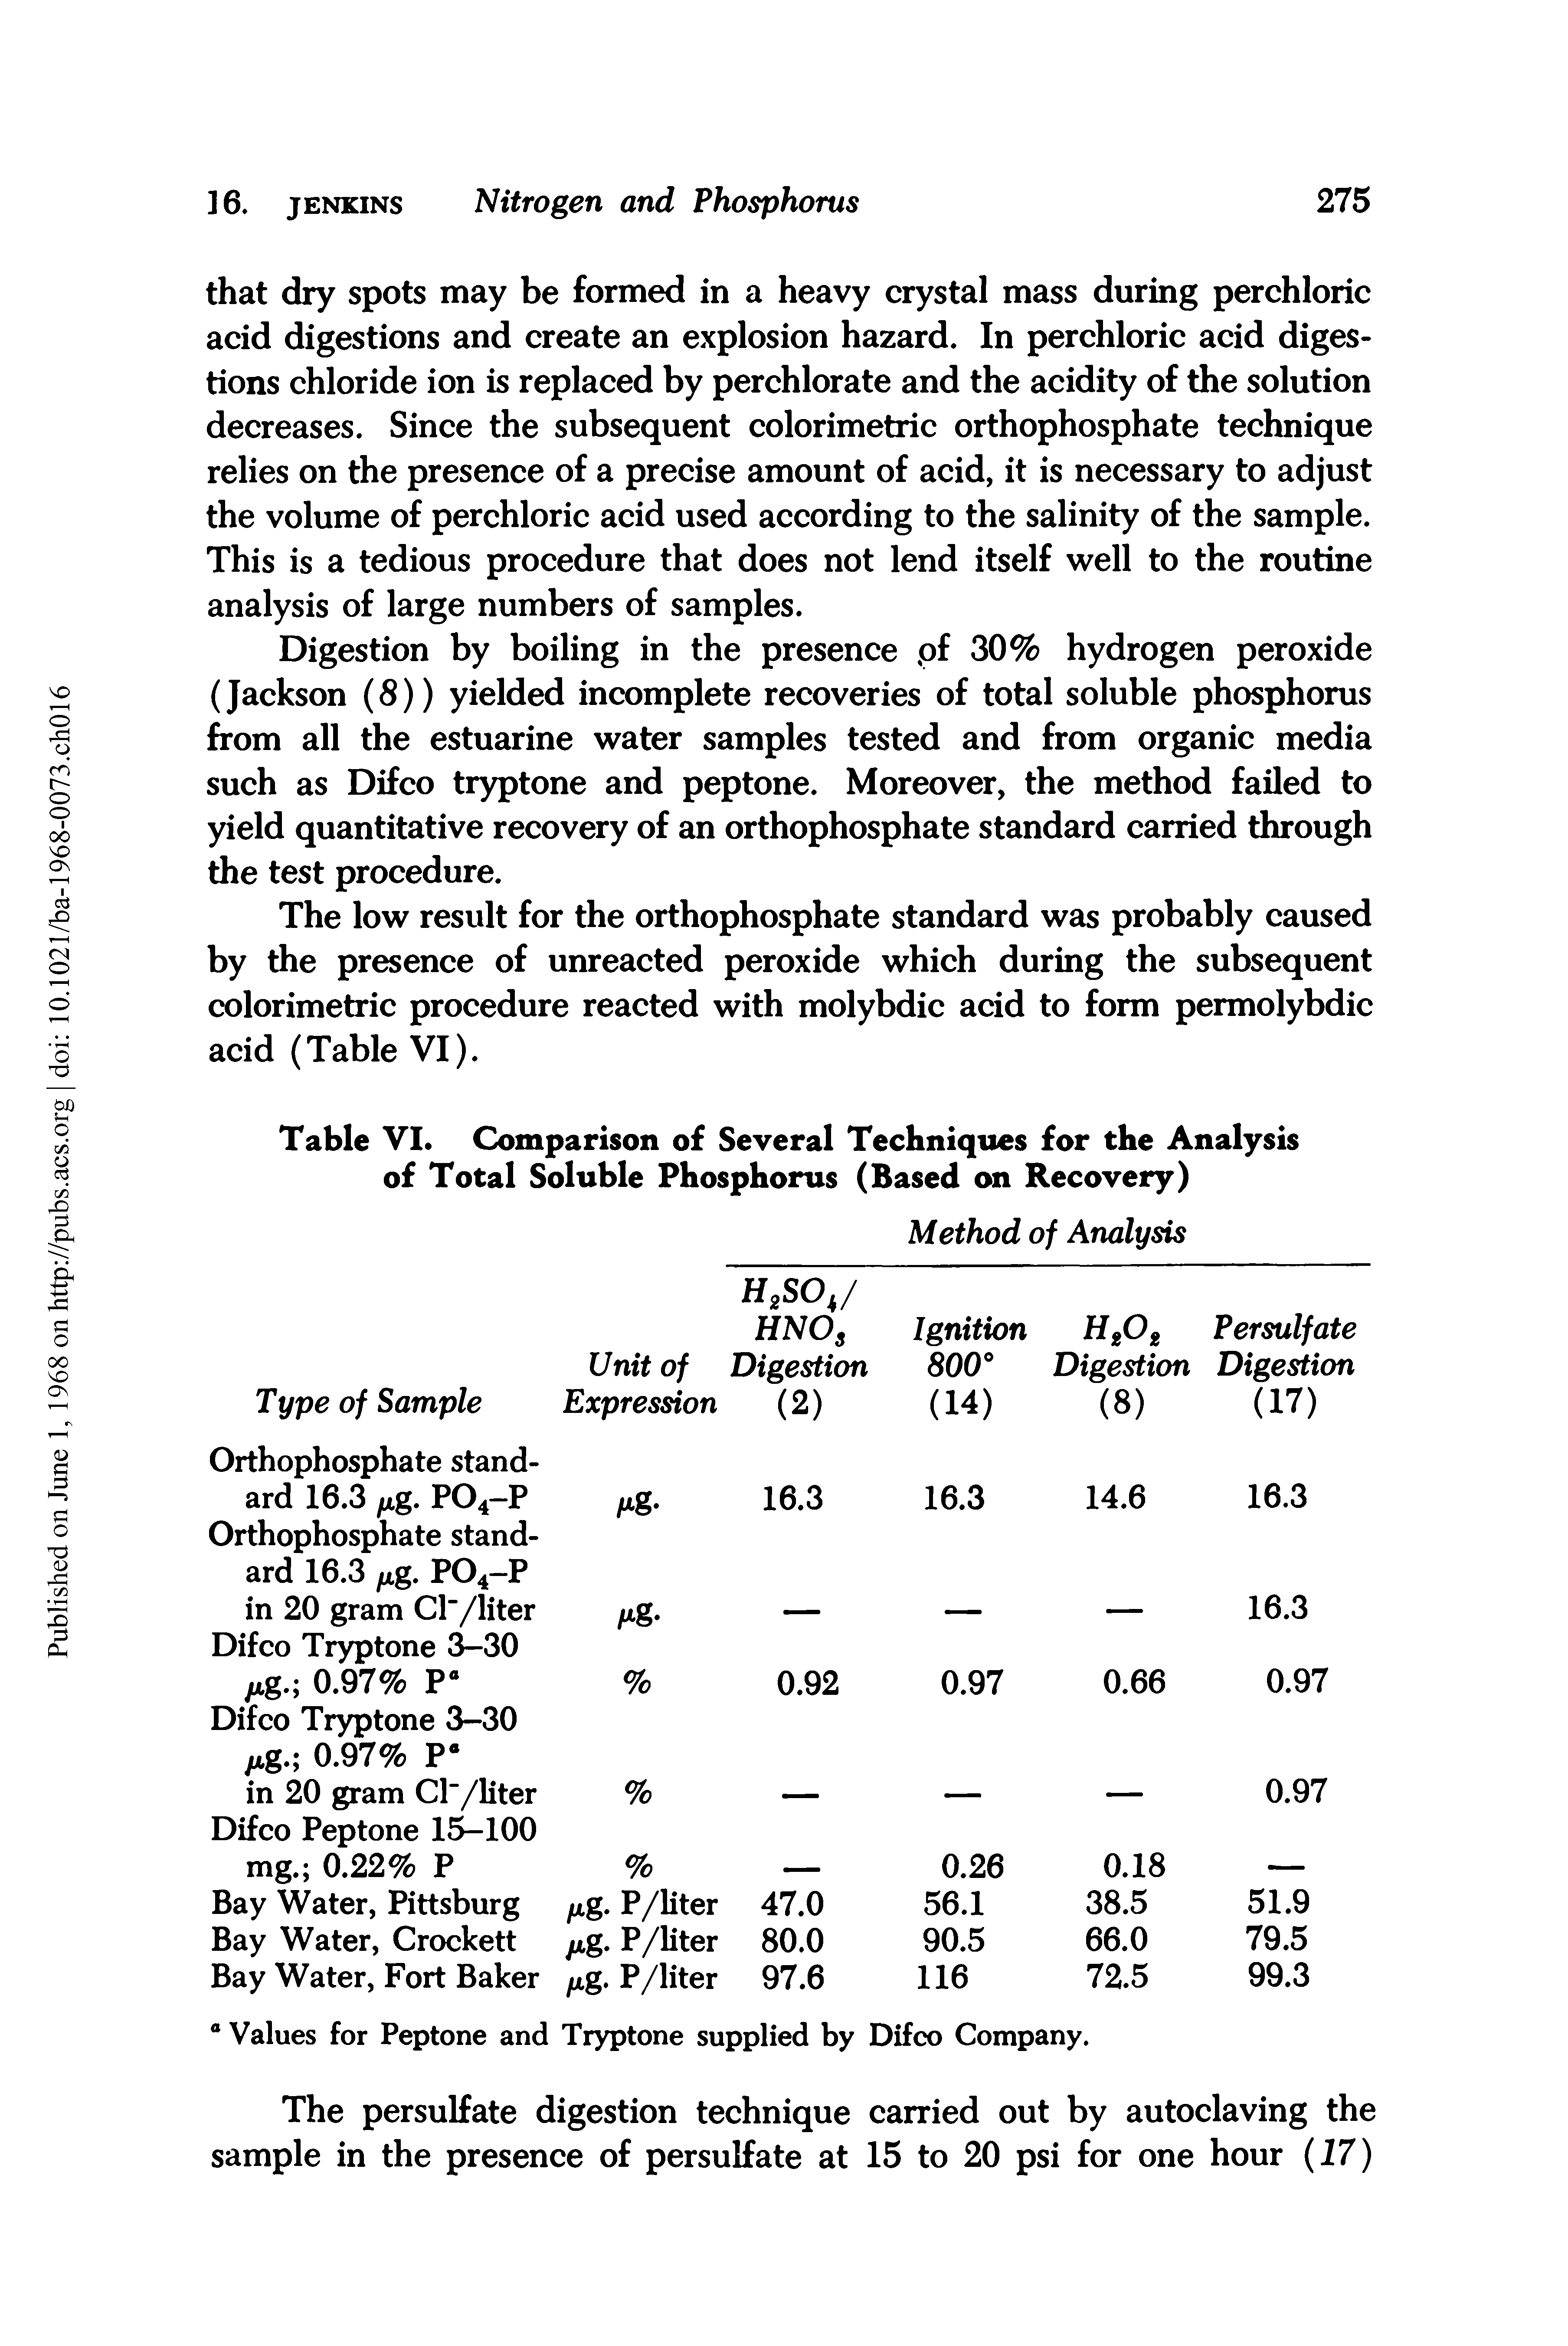 Table VI. Comparison of Several Techniques for the Analysis of Total Soluble Phosphorus (Based on Recovery)...